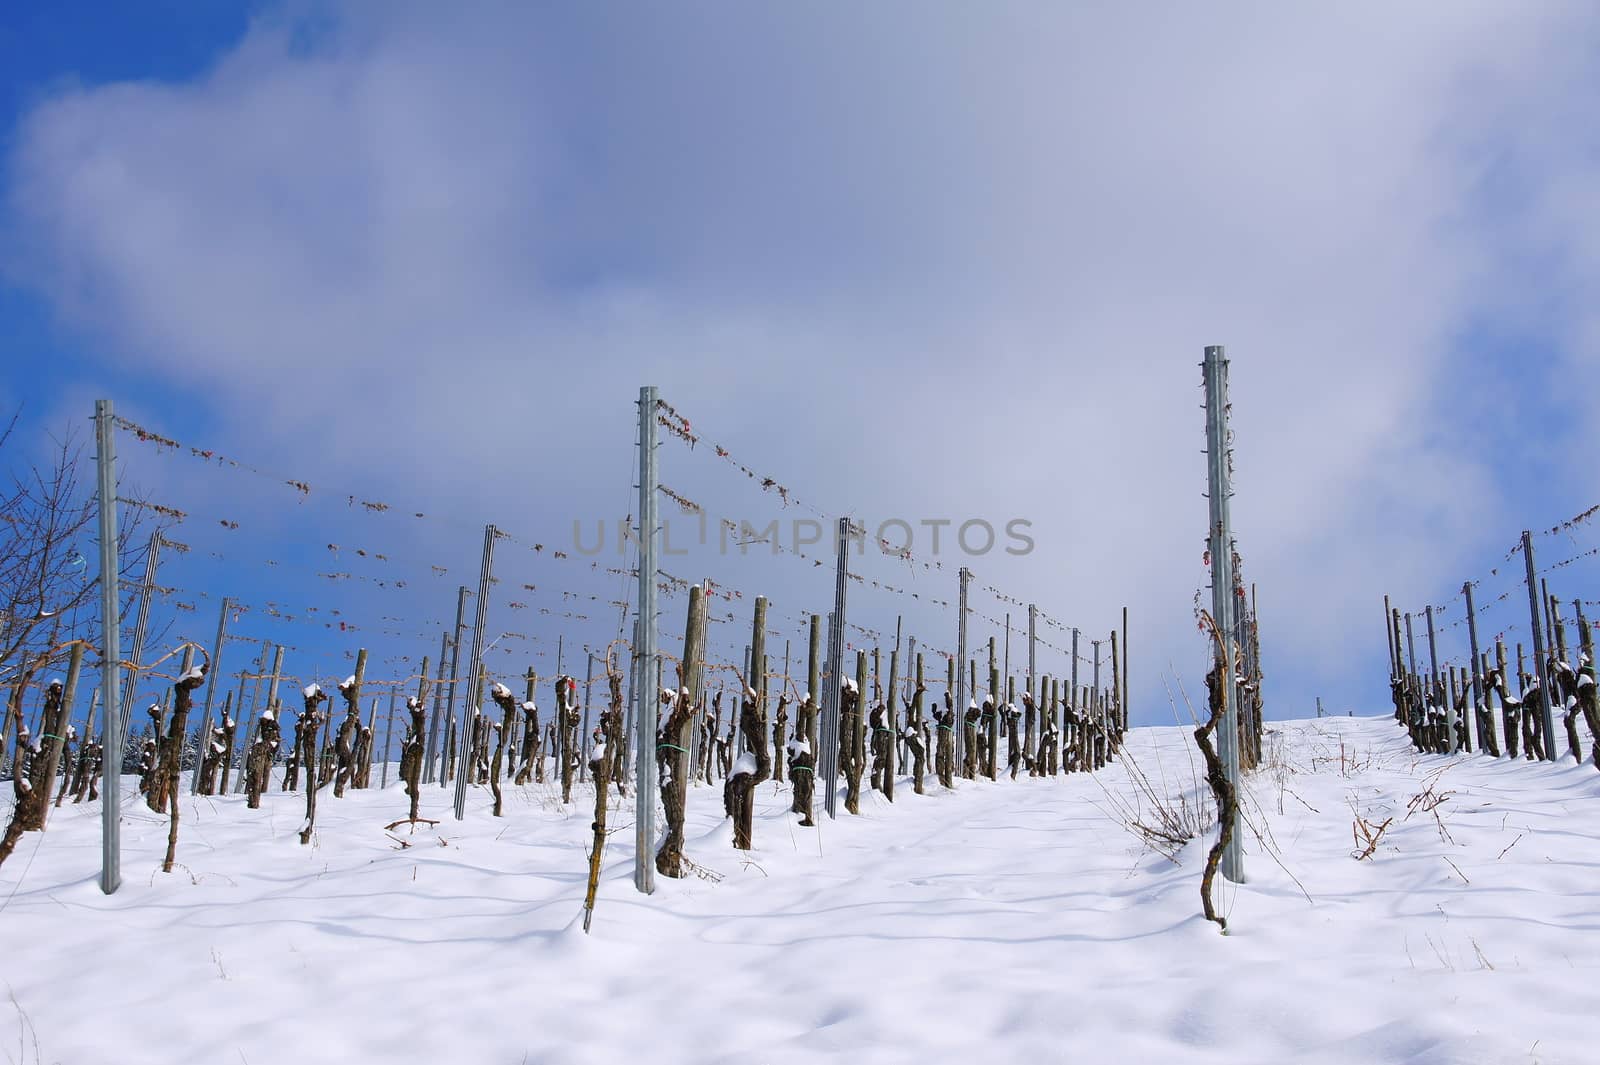 snowy vineyard with Drahtbau and bare vines in the winter